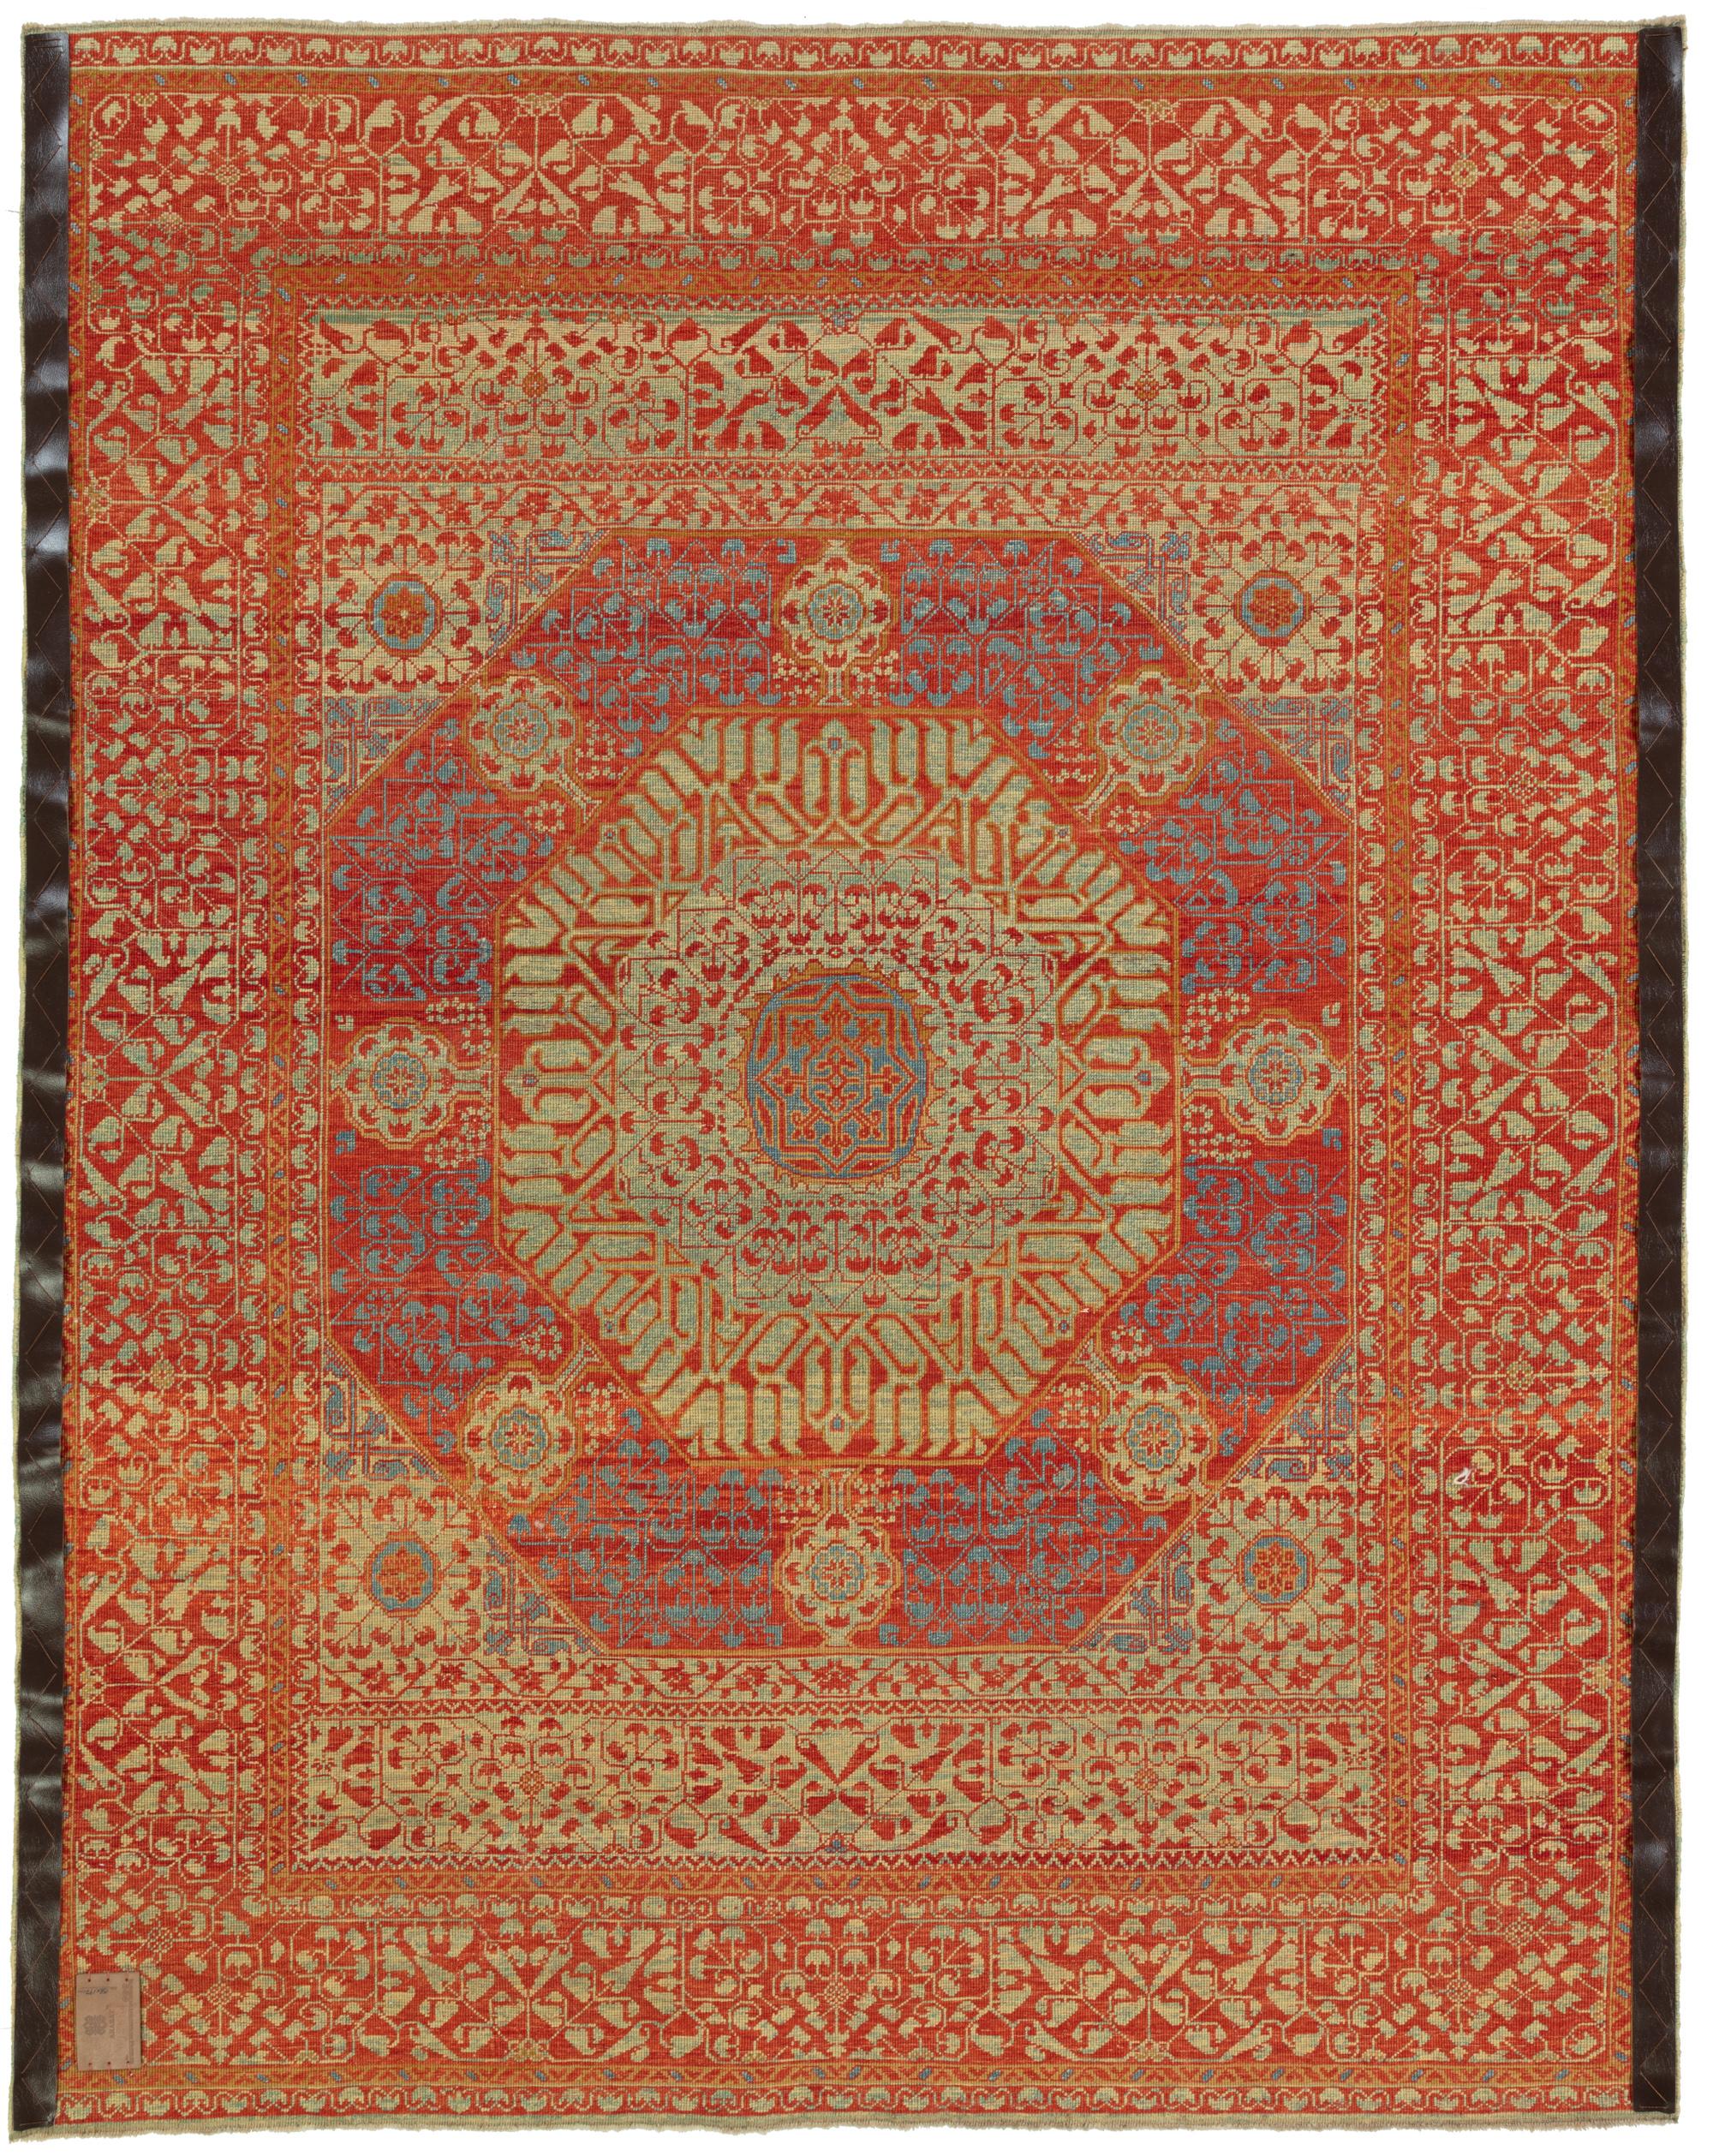 The design source of the rug comes from the book Renaissance of Islam, Art of the Mamluks, Esin Atil, Smithsonian Institution Press, Washington D.C., 1981 nr.128. This rug with a large central octagon was designed in the early 16th-century rug by